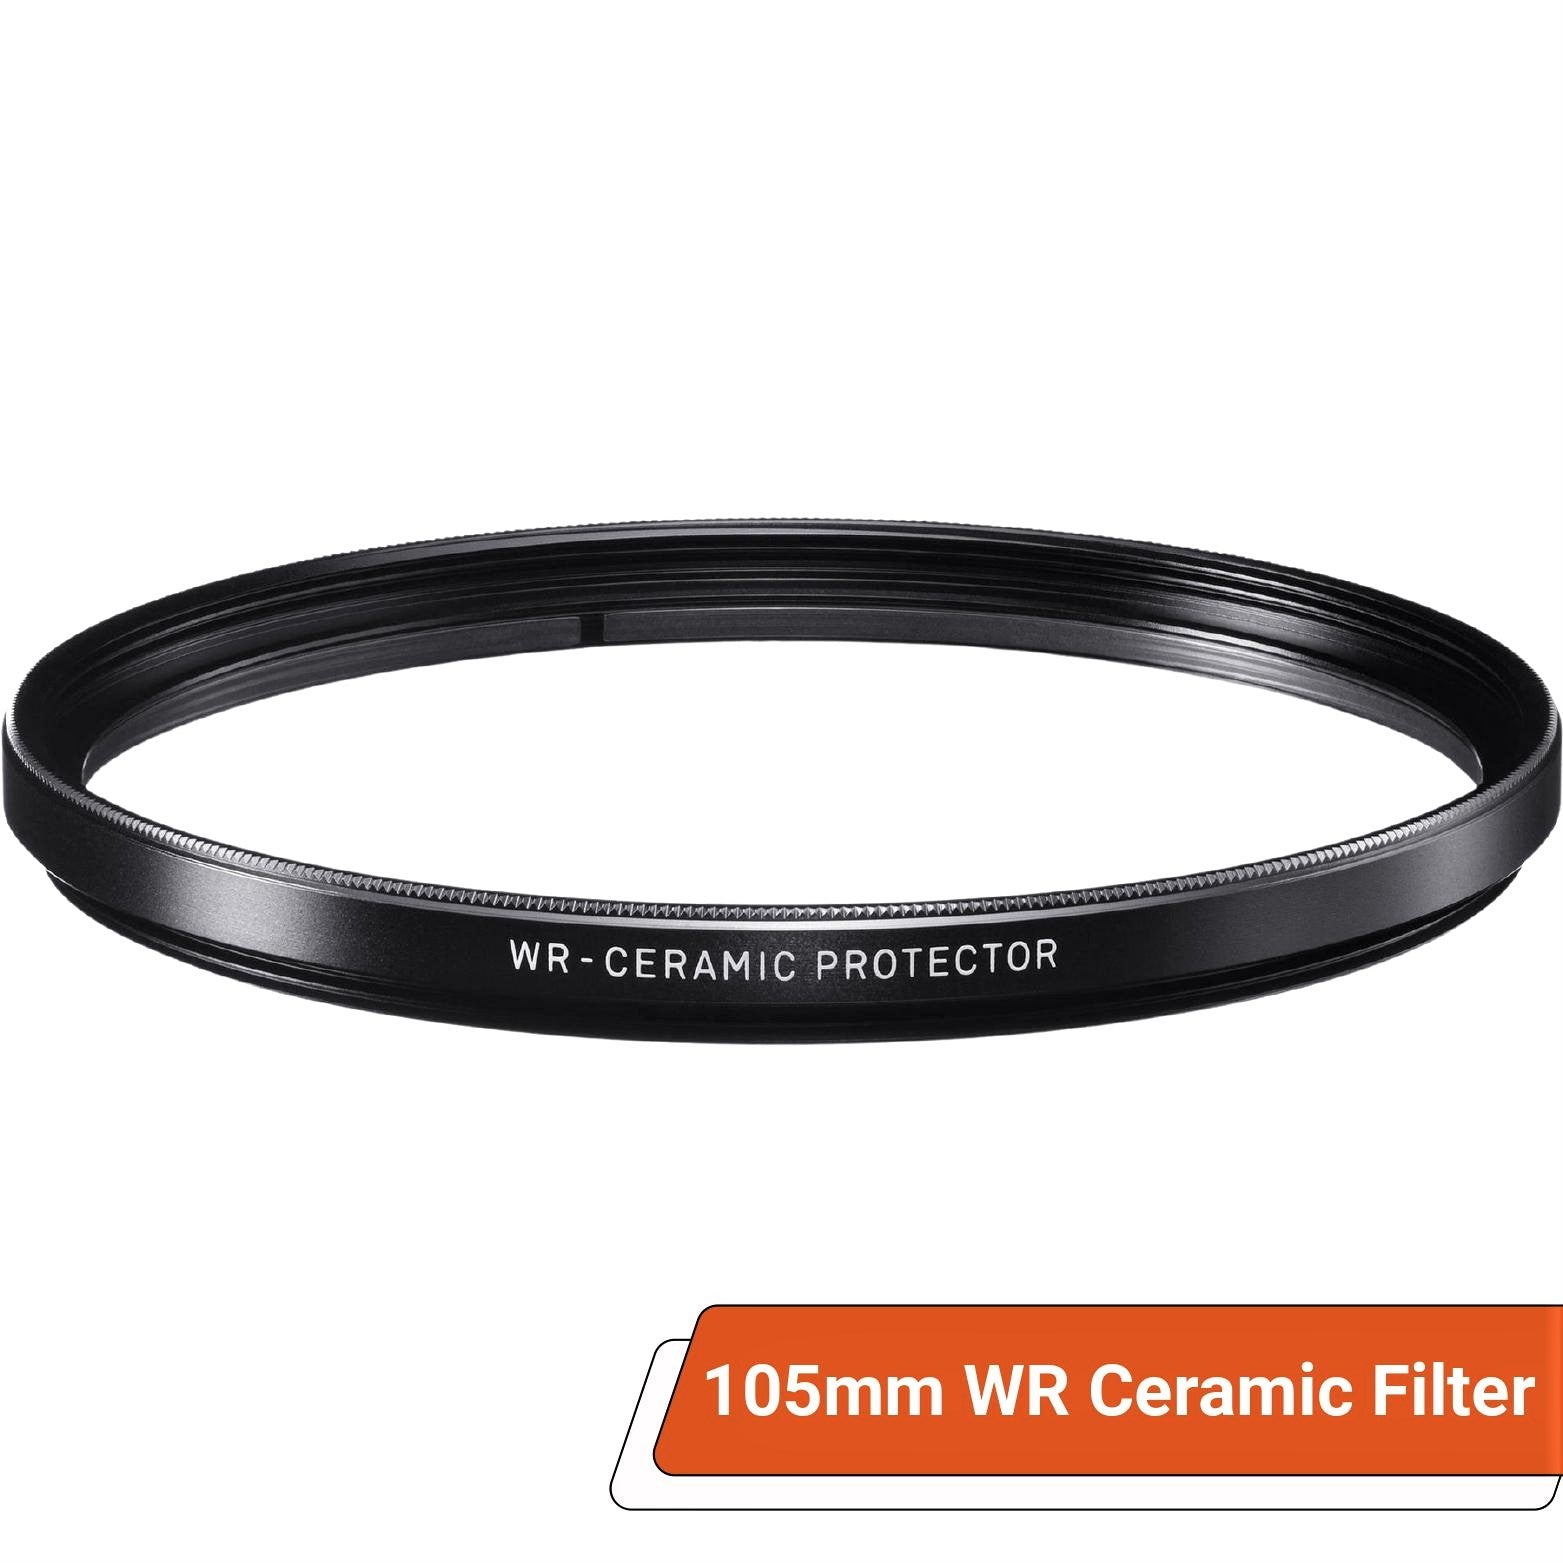 Sigma 105mm WR (Water Repellent) Ceramic Protector Filter